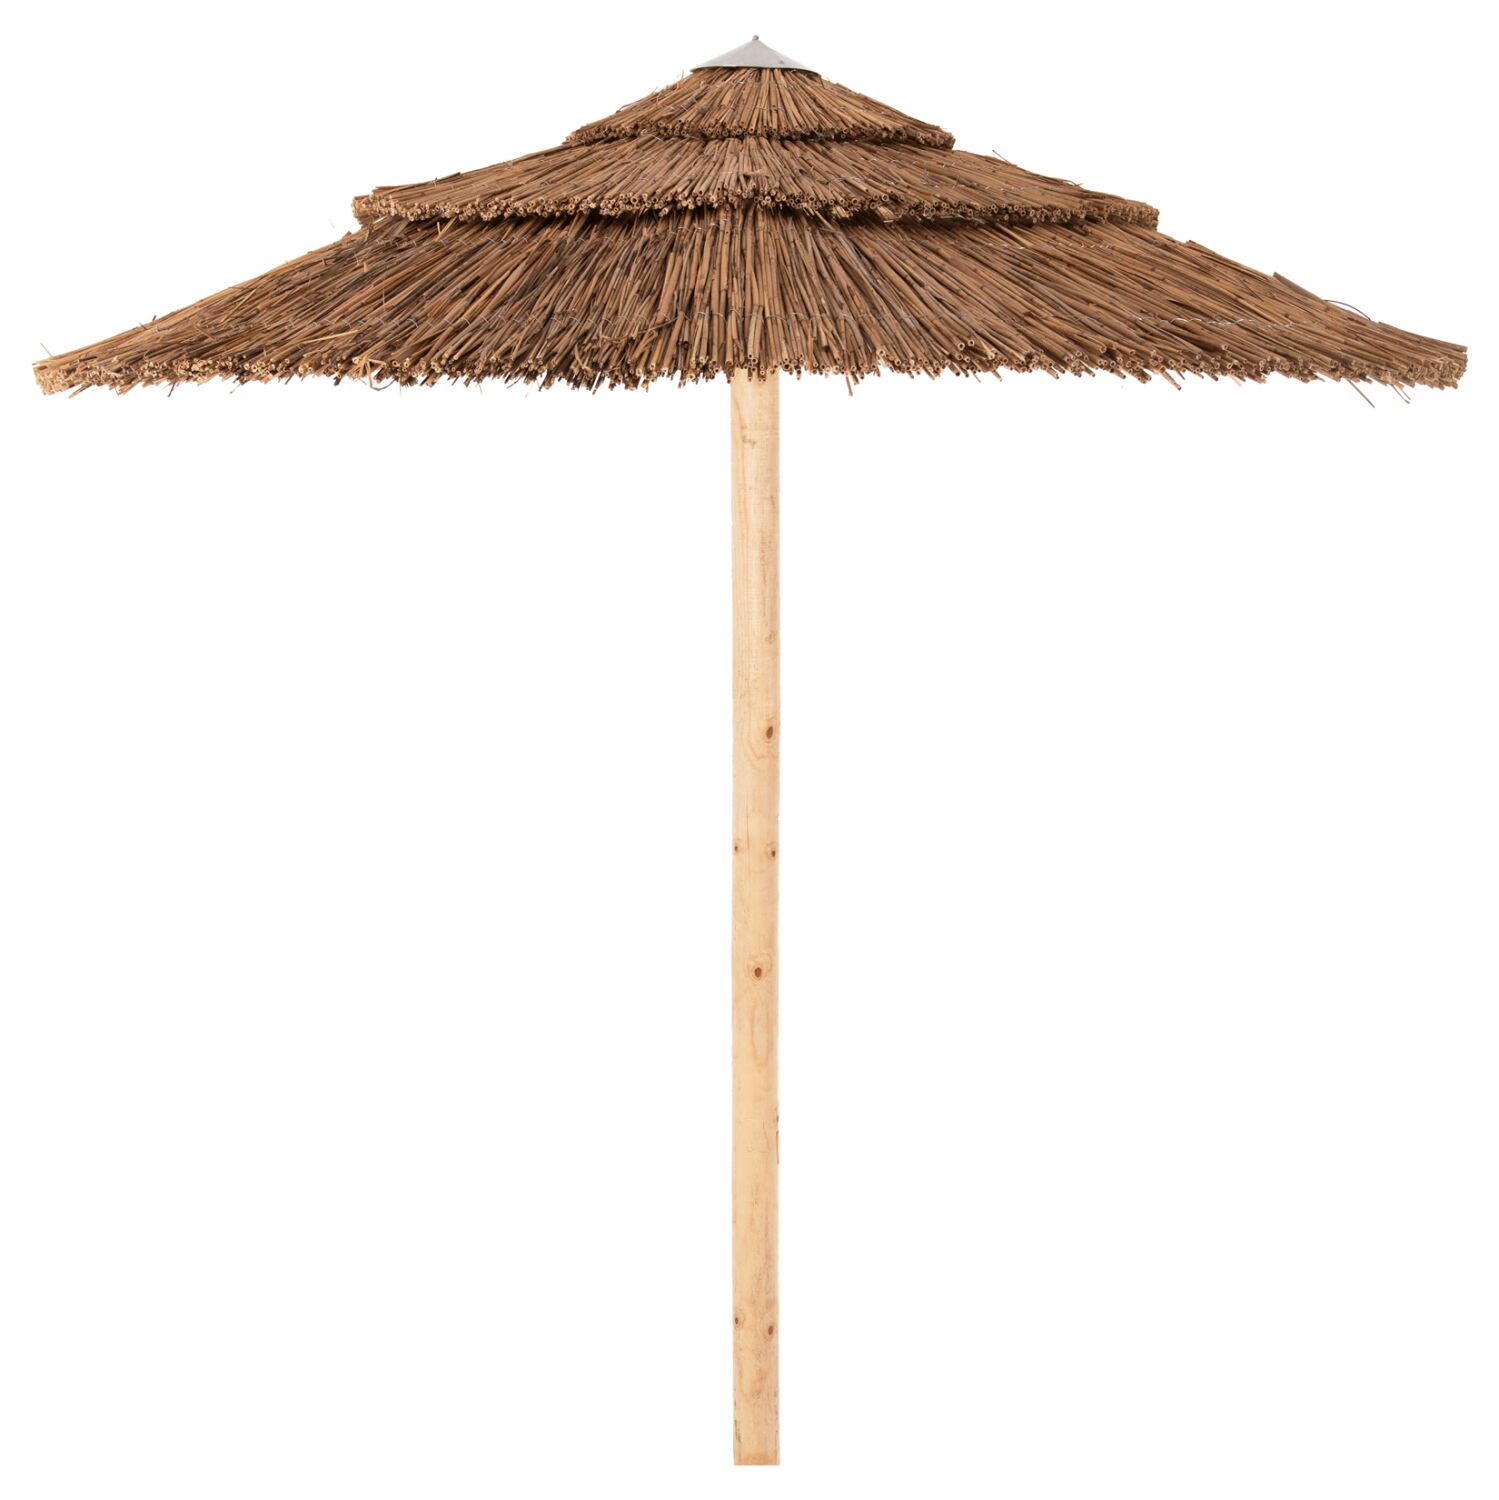 UMBRELLA HM6094 PINE WOOD AND REED SHADE- 3 LEVELS-HEAVY DUTY-275H cm.